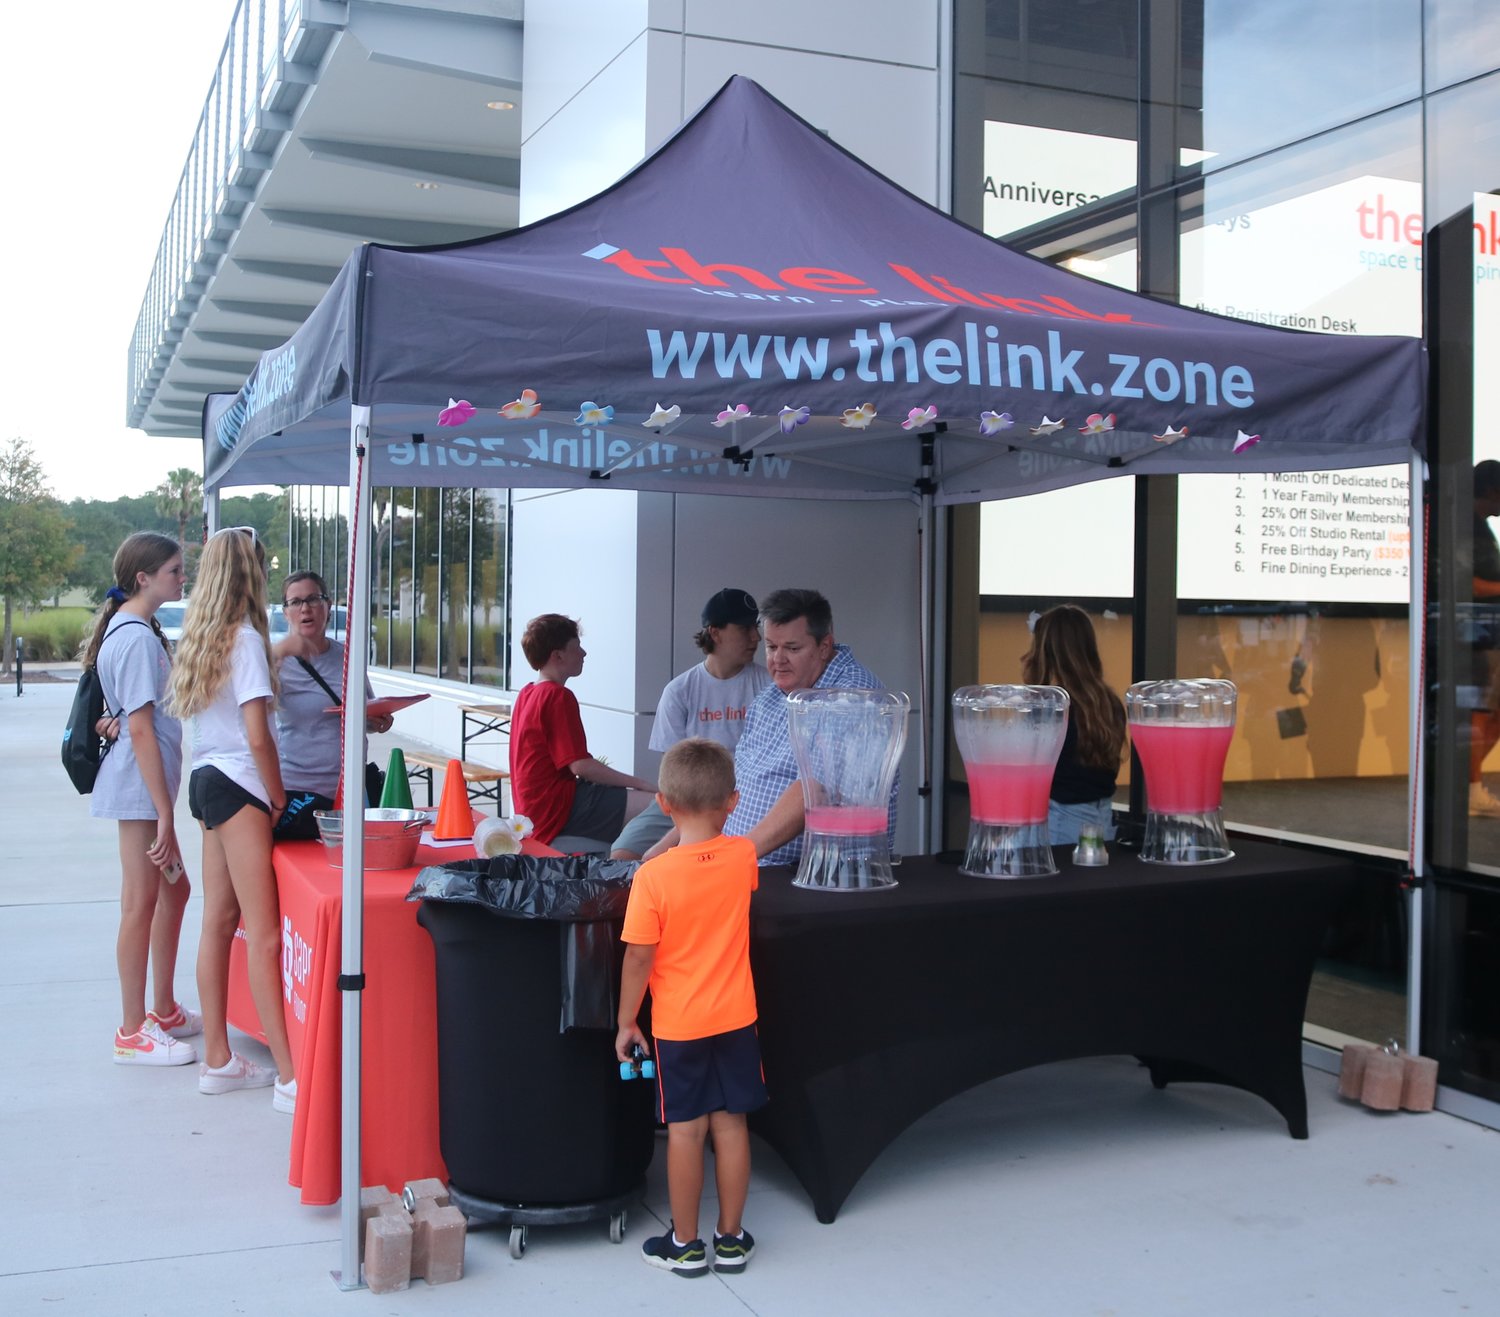 The link’s pavilion was a great place to get refreshments on a hot and humid afternoon during the Family Olympics.